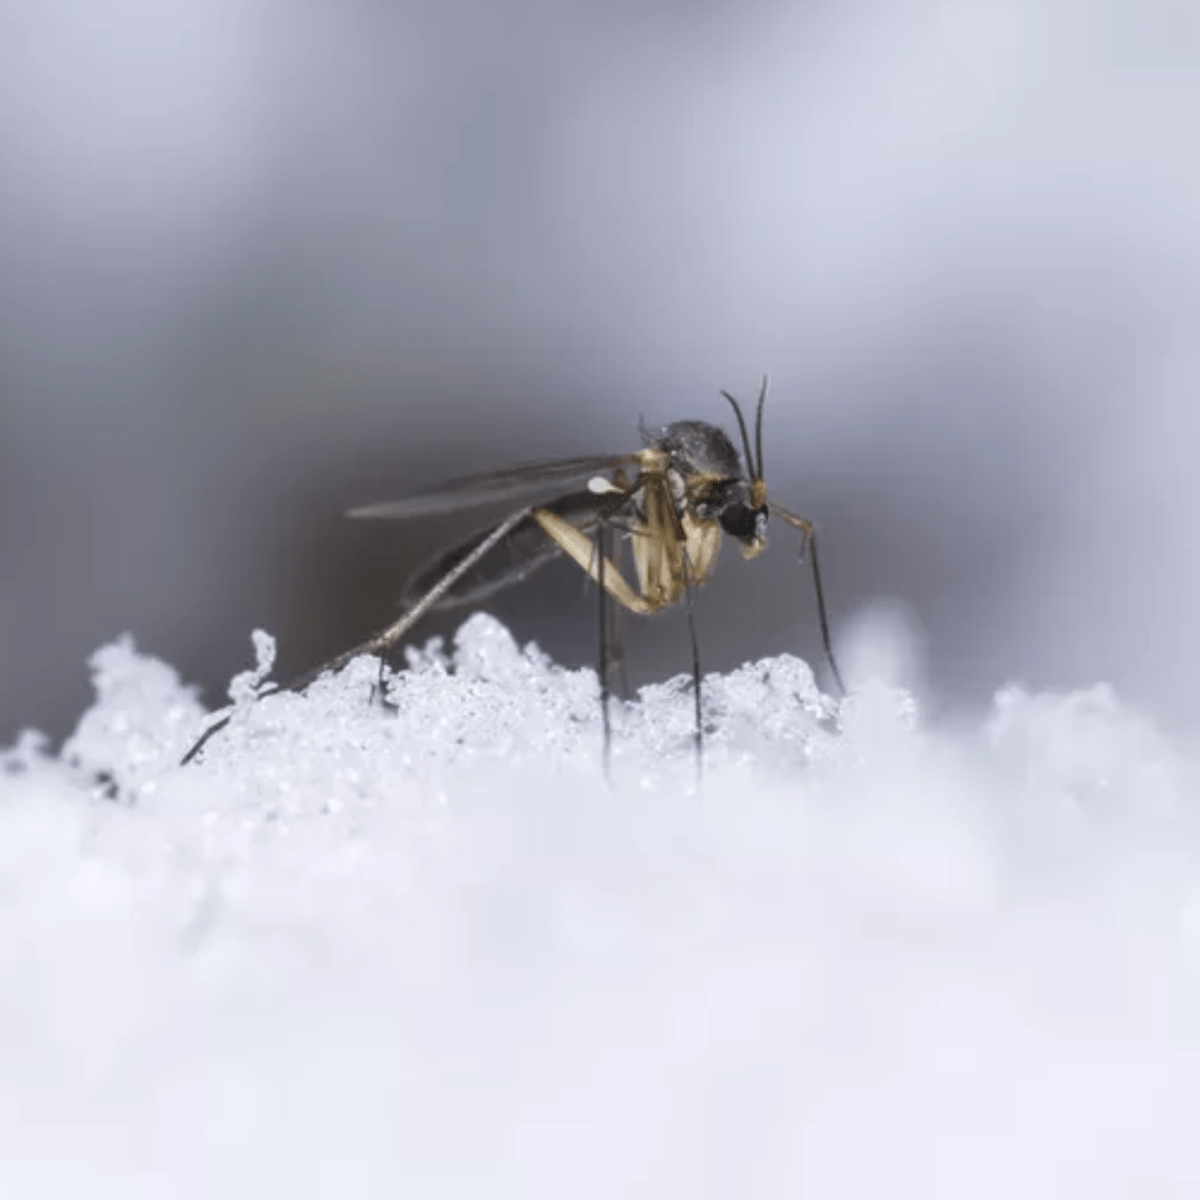 What happens to mosquitoes in winter season?